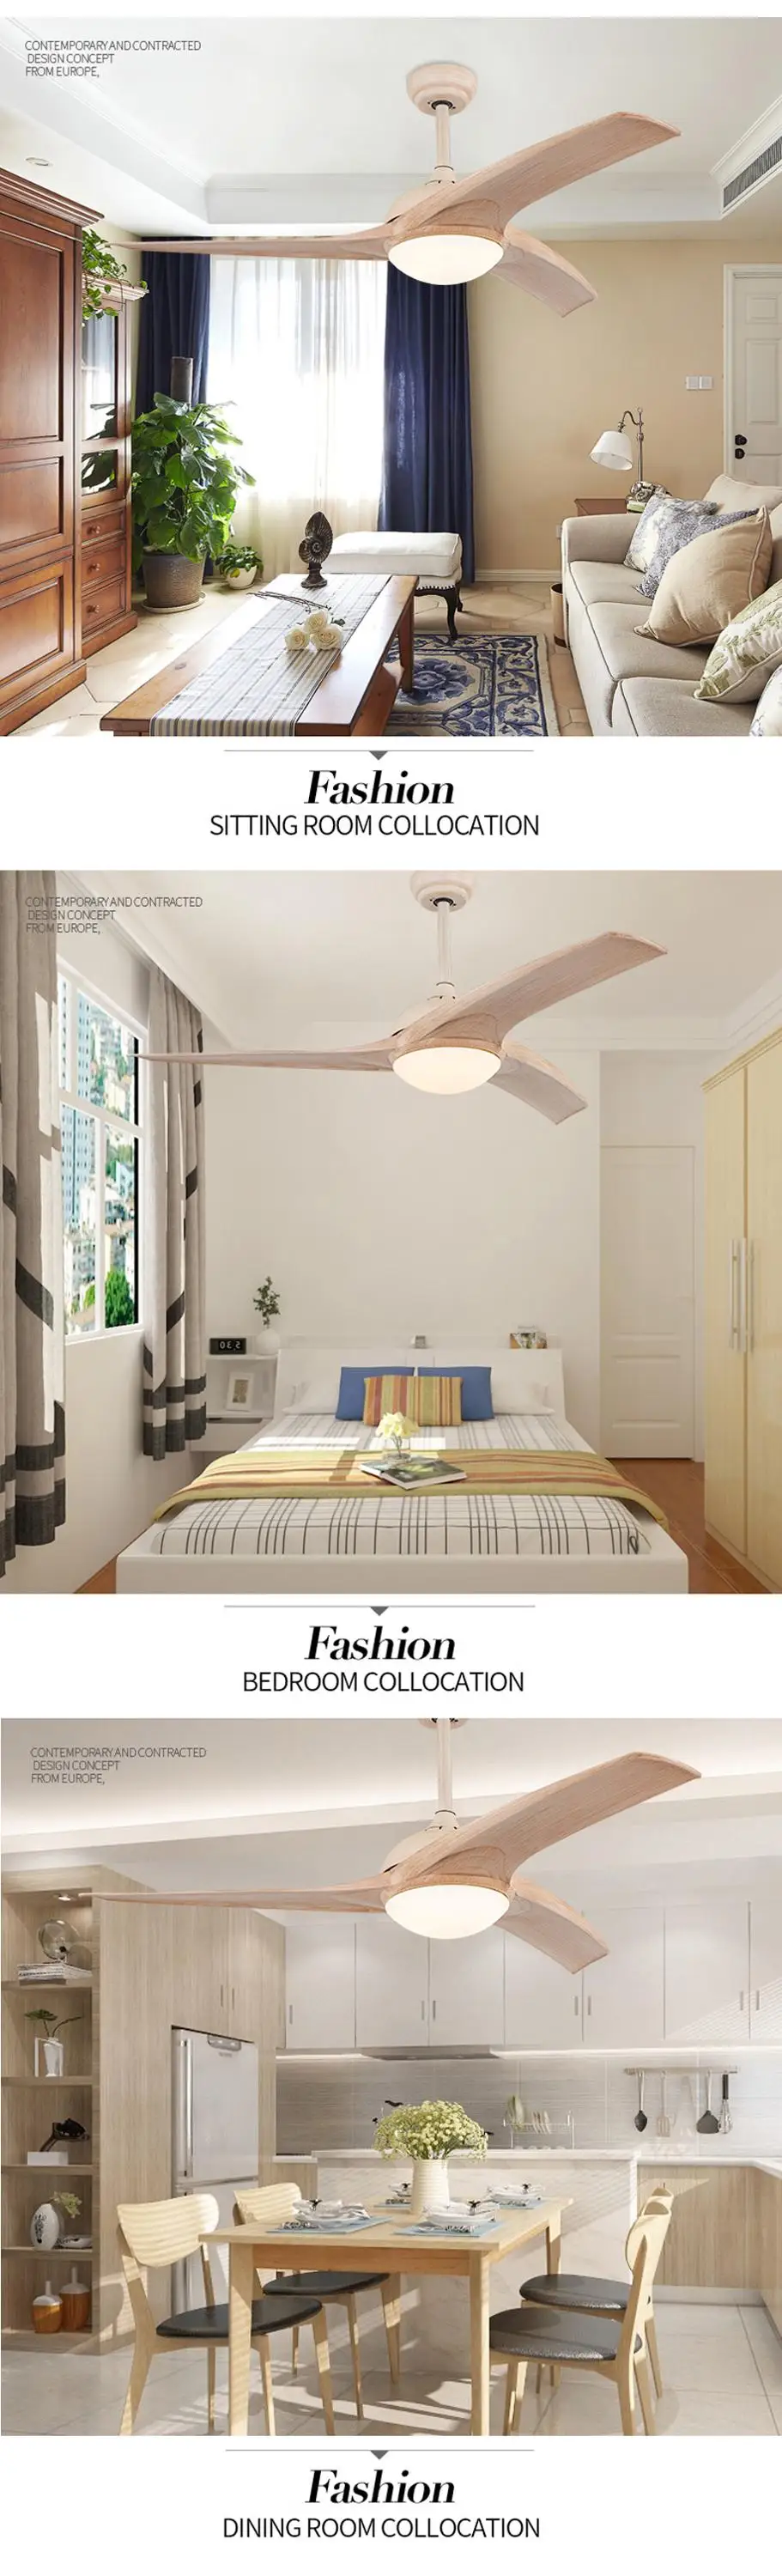 2018 Multi-function modern energy saving high quality ceiling fan with light